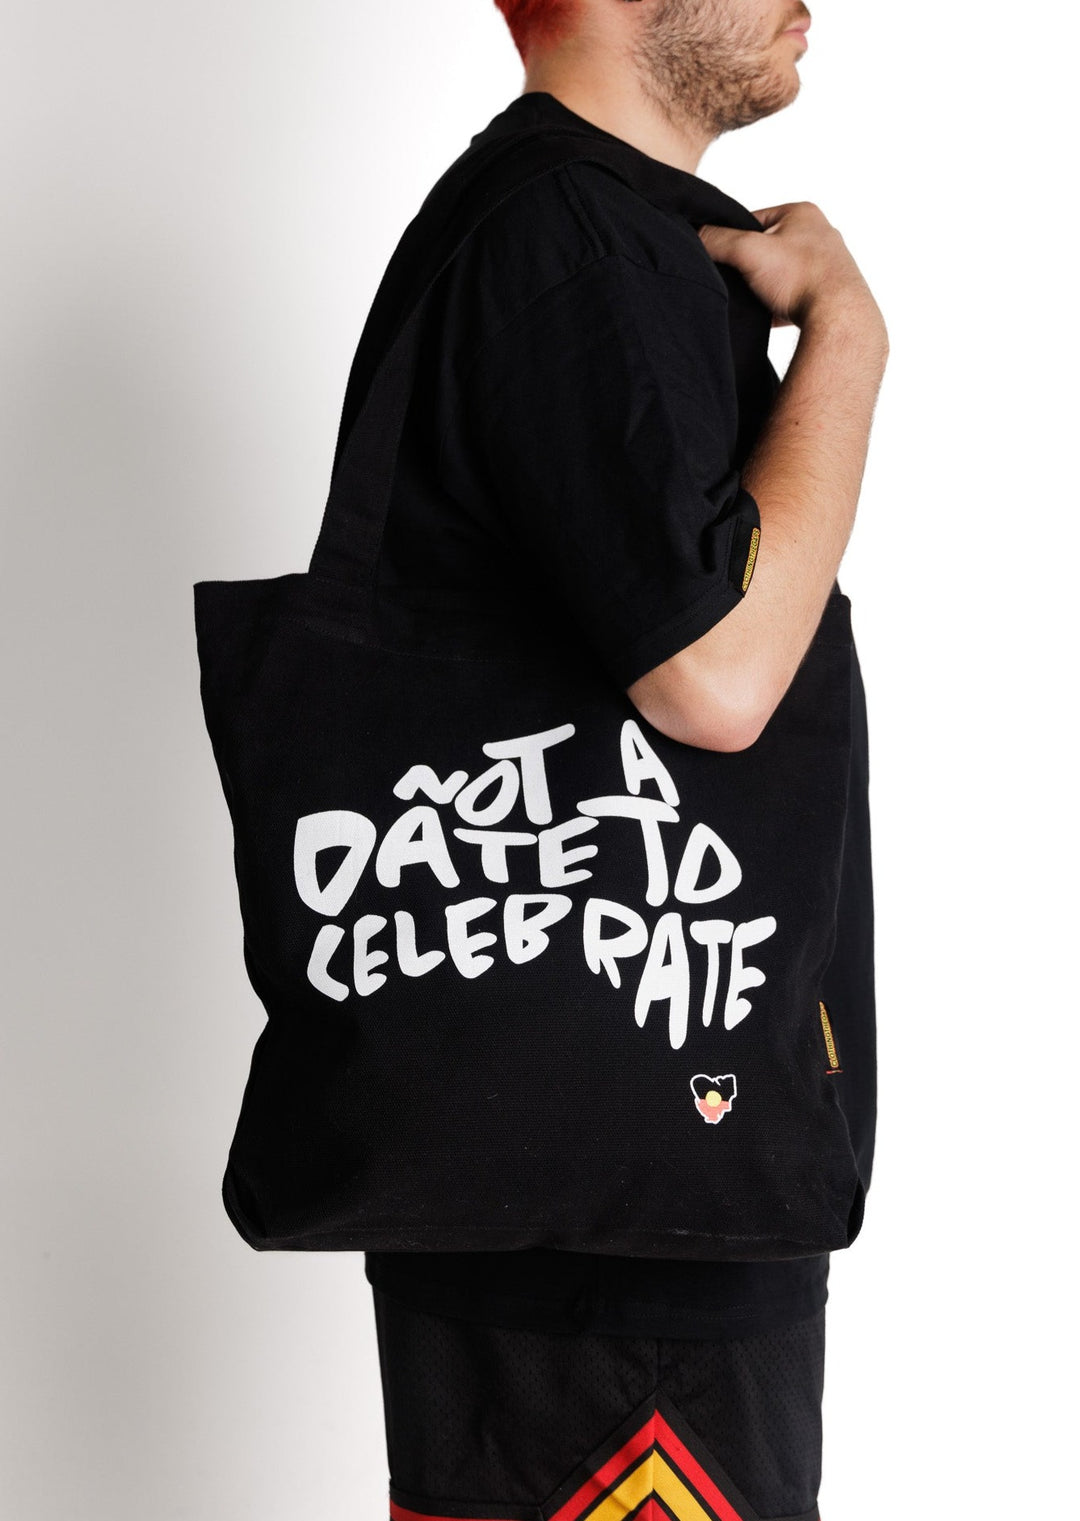 Not A Date To Celebrate Tote Bag